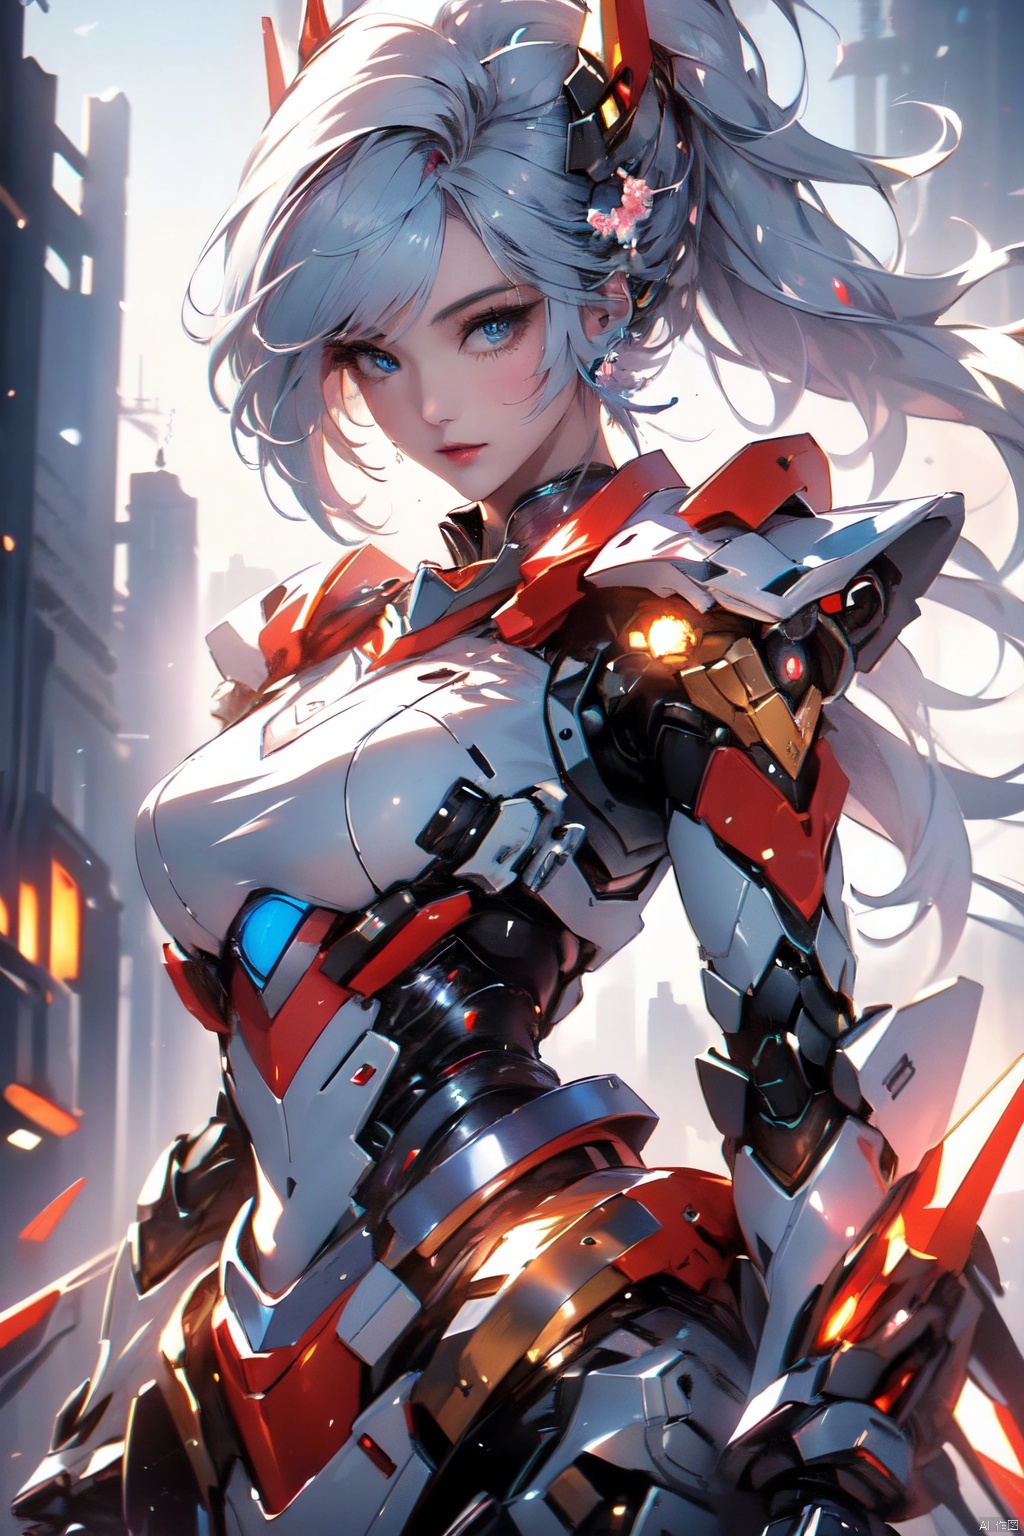  1 girl, frontal,blue eyes, white hair blowing in the wind, hands open, giant mecha warrior standing next to her, science fiction novel, mechanical armor, metallic luster, electroplating, clothing logo, Mars, spacecraft, floating cannon, hexagonal, (from bottom: 1.2), glow, backlight, (background blurry: 1.2) movie lighting, low illumination, VHS style, (masterpiece: 1.3), (best quality: 1.1), complex details, (Surrealism: 1.1), (Realistic details: 1.1), High level of detail, (The text on the cover should be bold and eye-catching, partially hidden behind the characters, with magazine titles and eye-catching titles: 1.4), Superview, Wide angle. Dynamic pose, lighting_ Stance, wide-angle lens